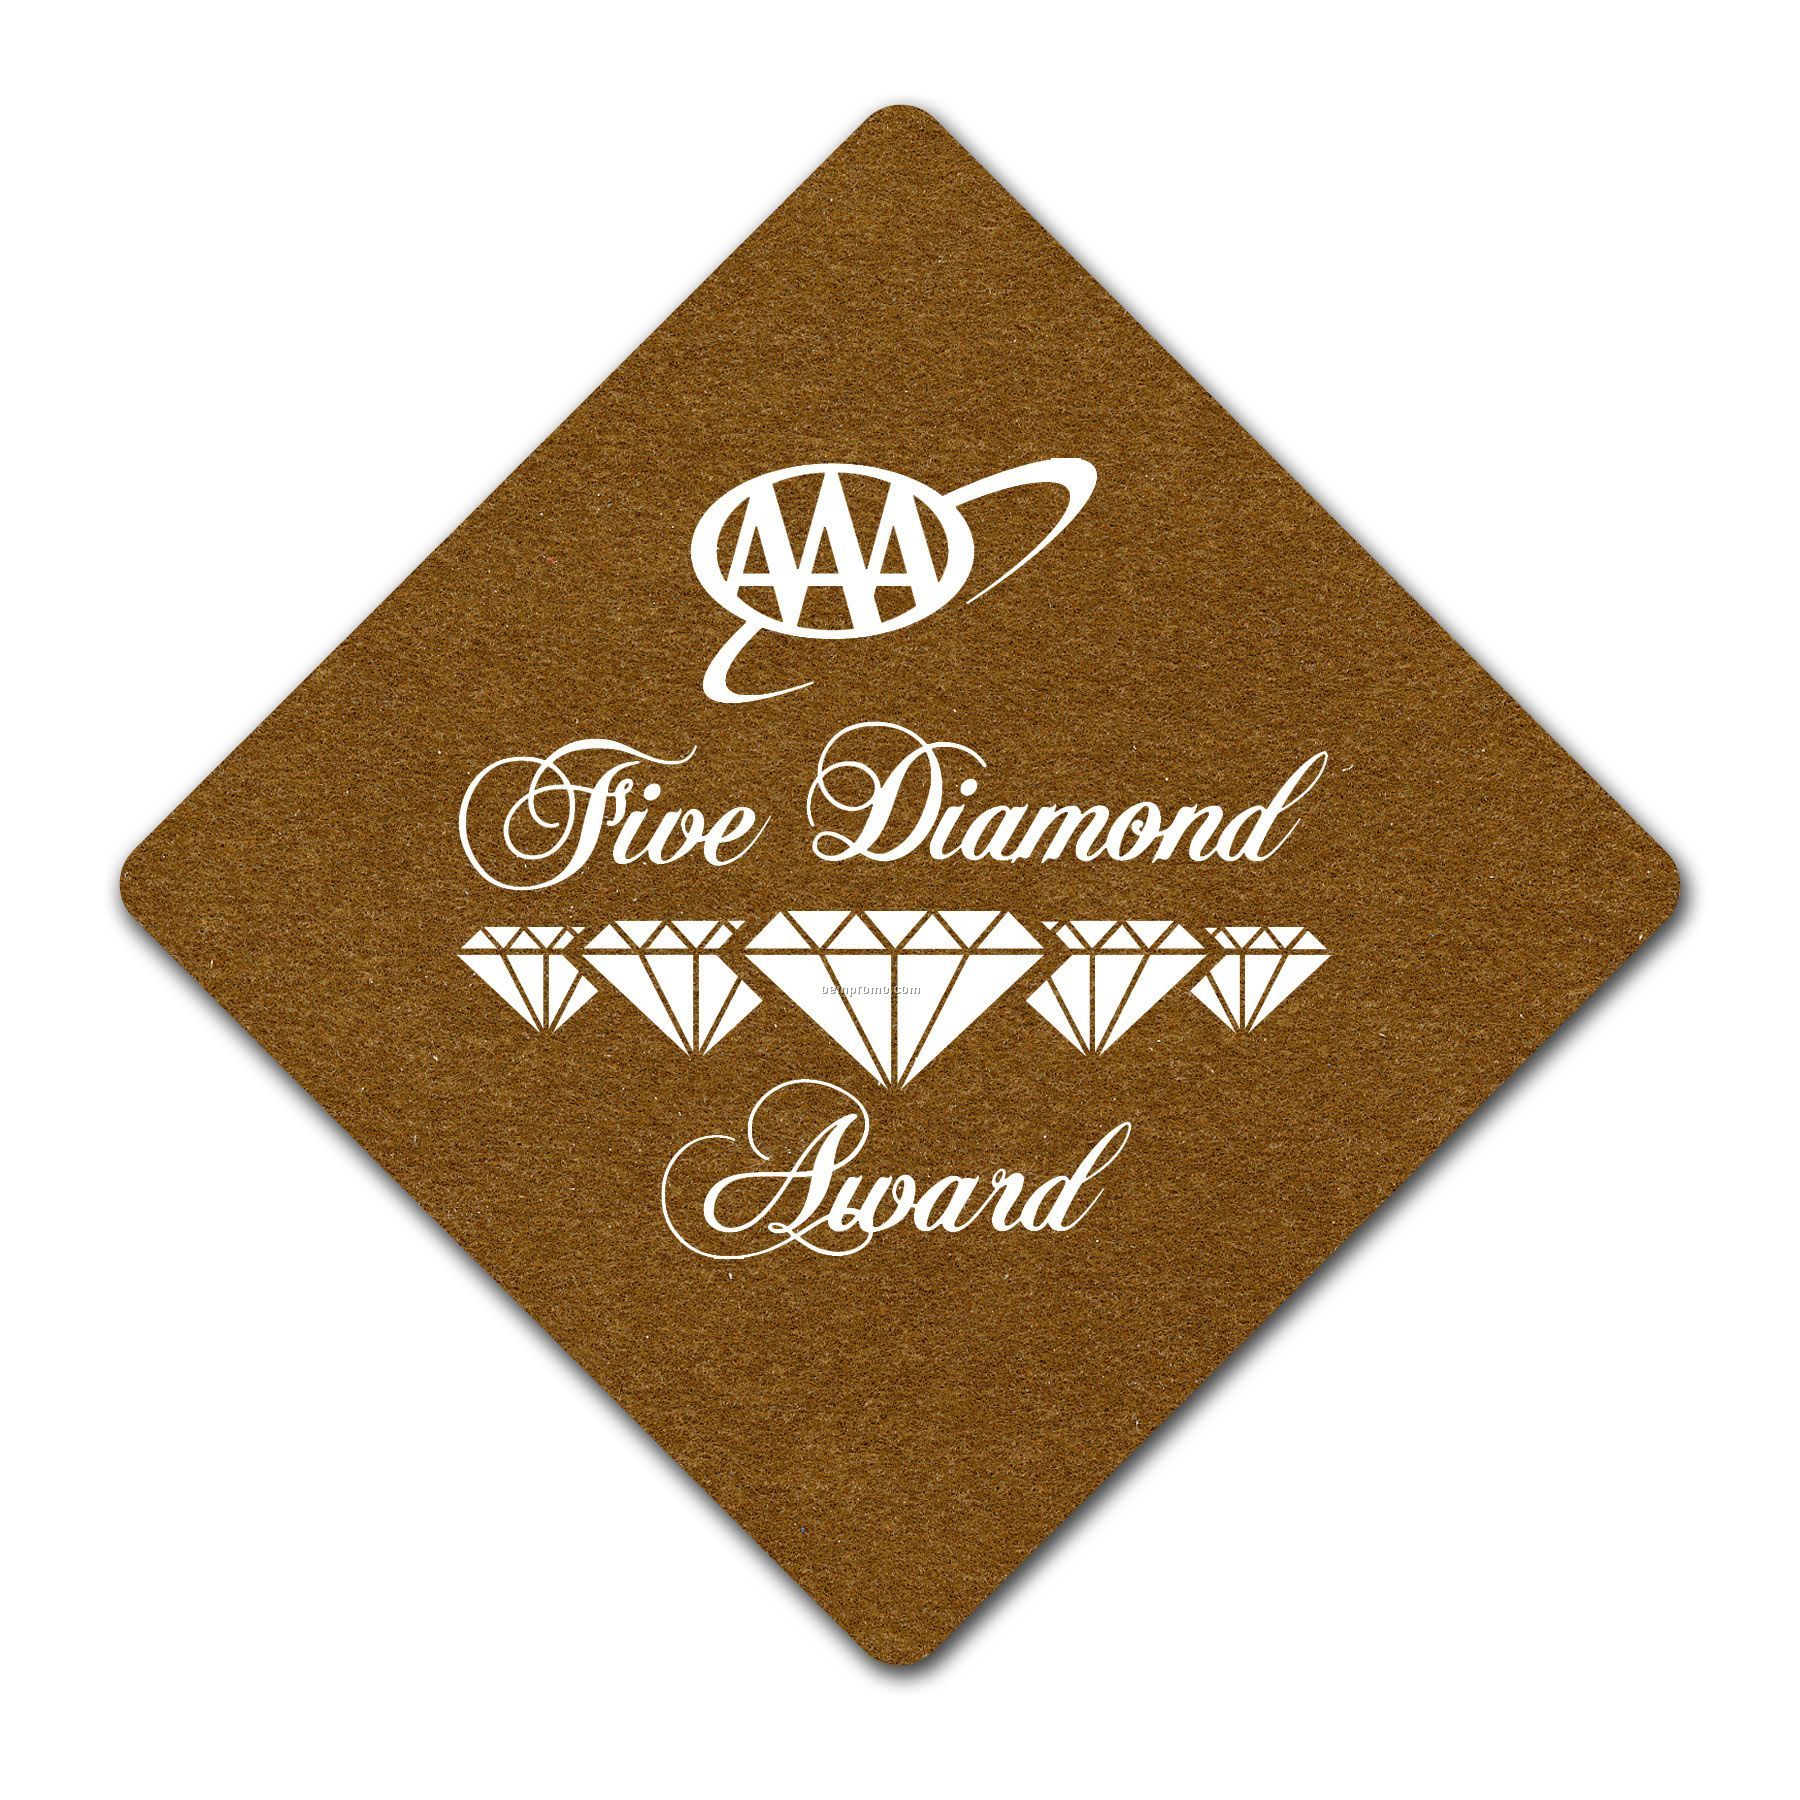 Soft Brushed Faux Suede Diamond Coaster